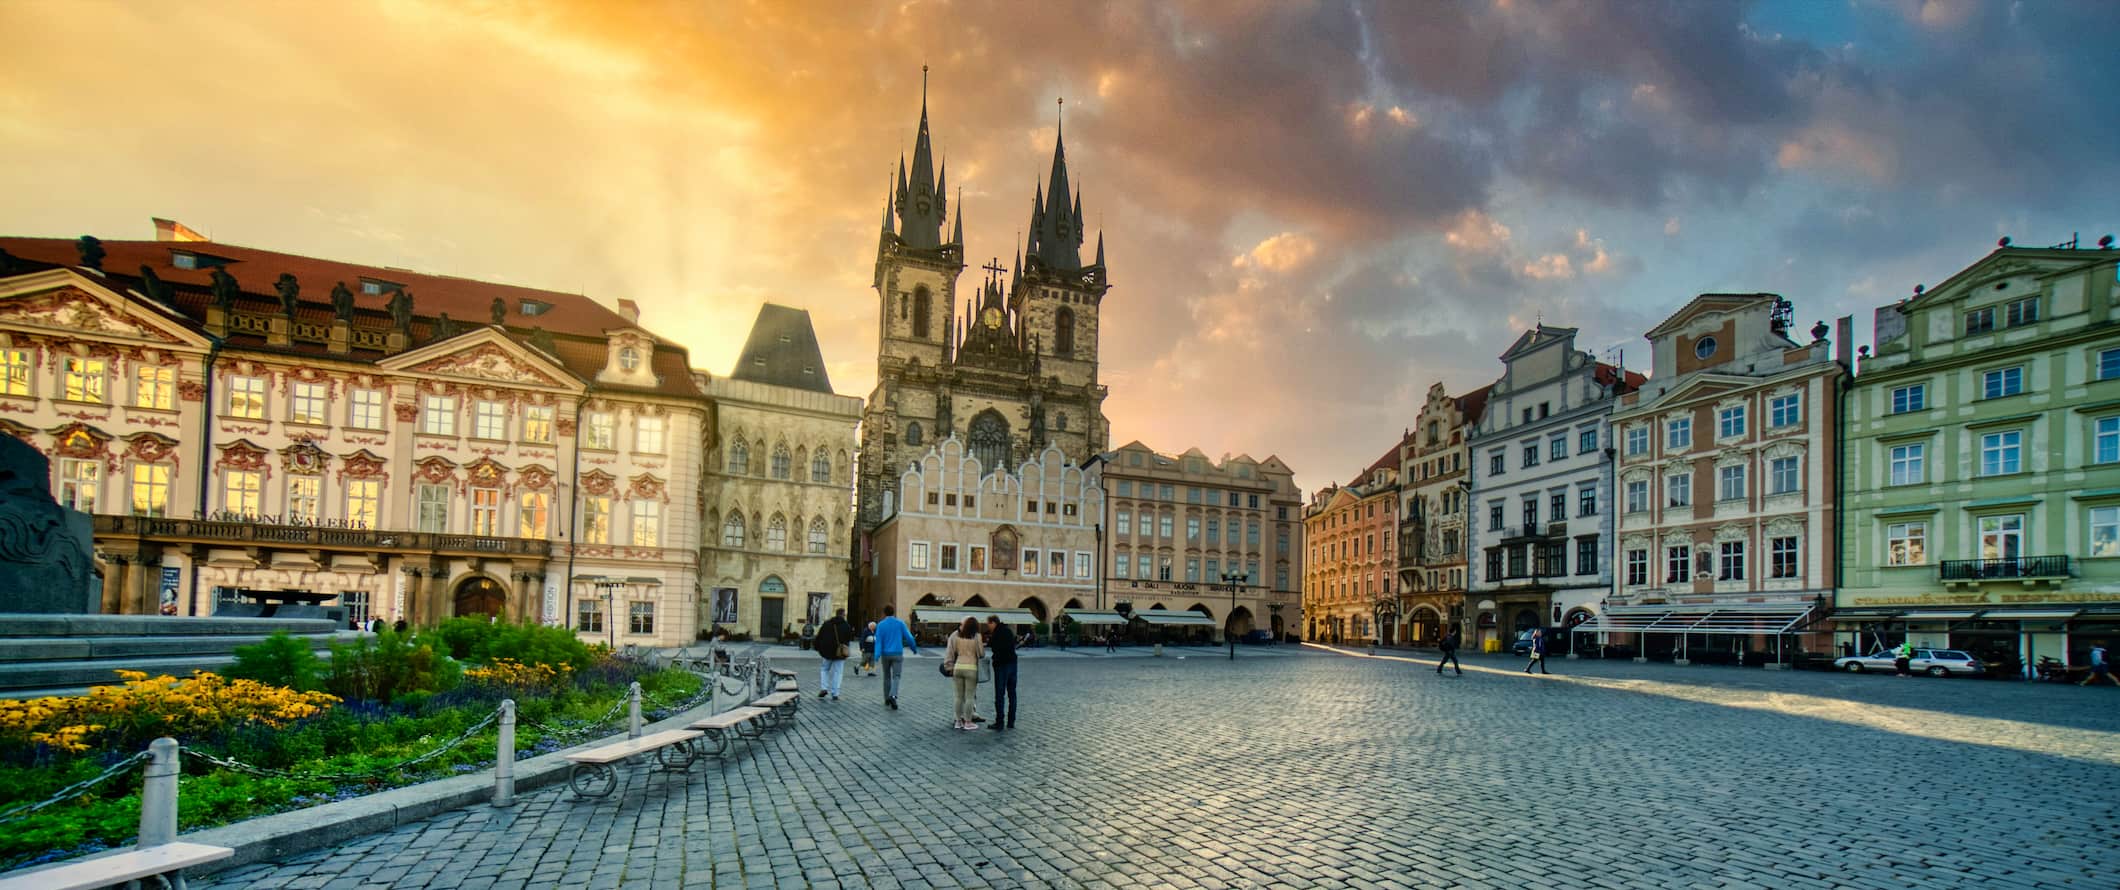 A large historic square without many people during sunset in Prague, Czech Republic